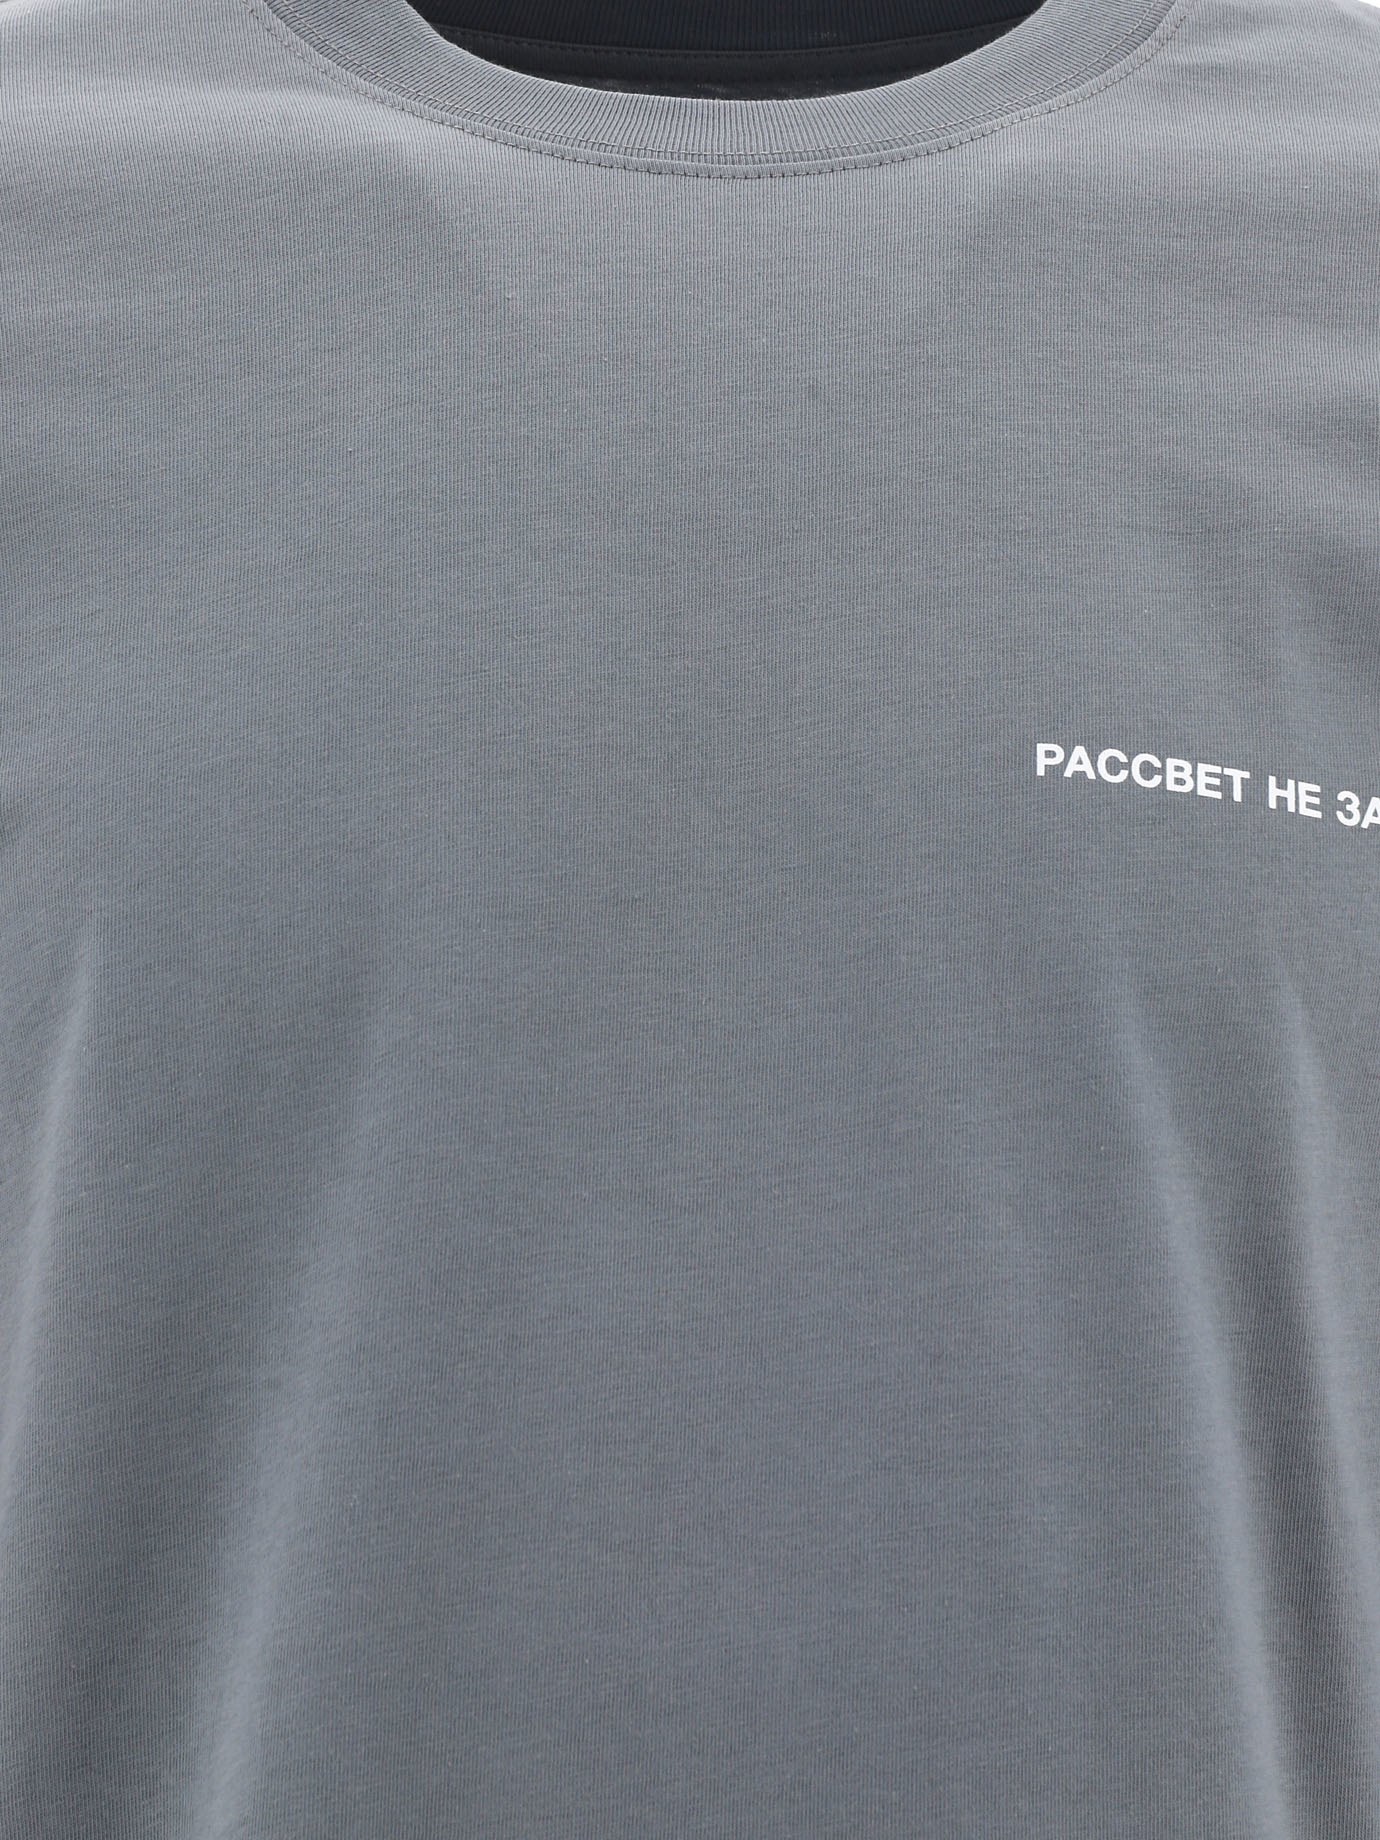 T-shirt  Small Logo  by Paccbet